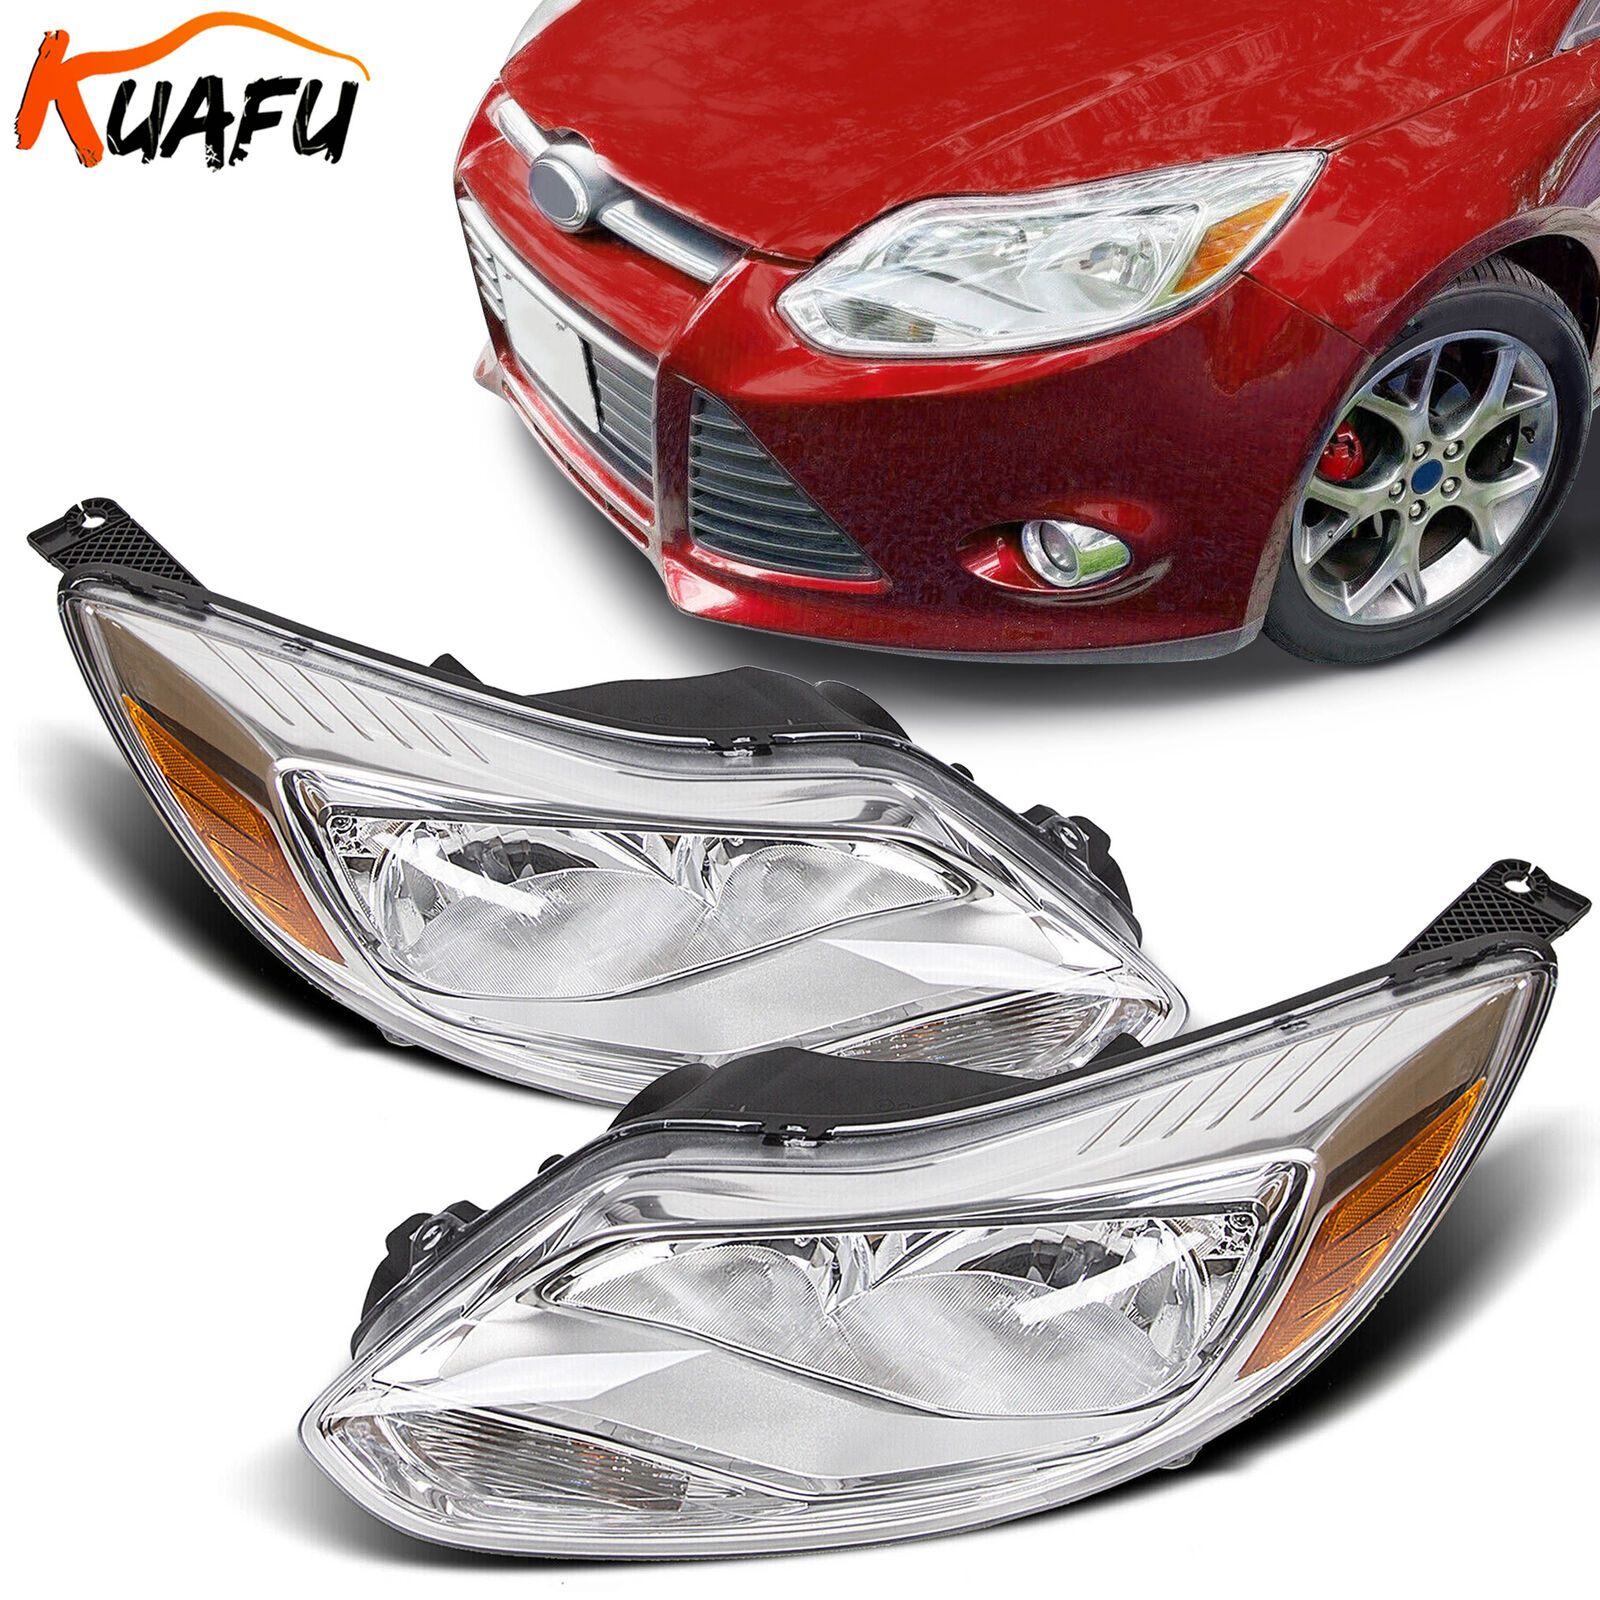 Fits 2012 2013 2014 Ford Focus Chrome Headlights HeadLamps Assembly Left&Right